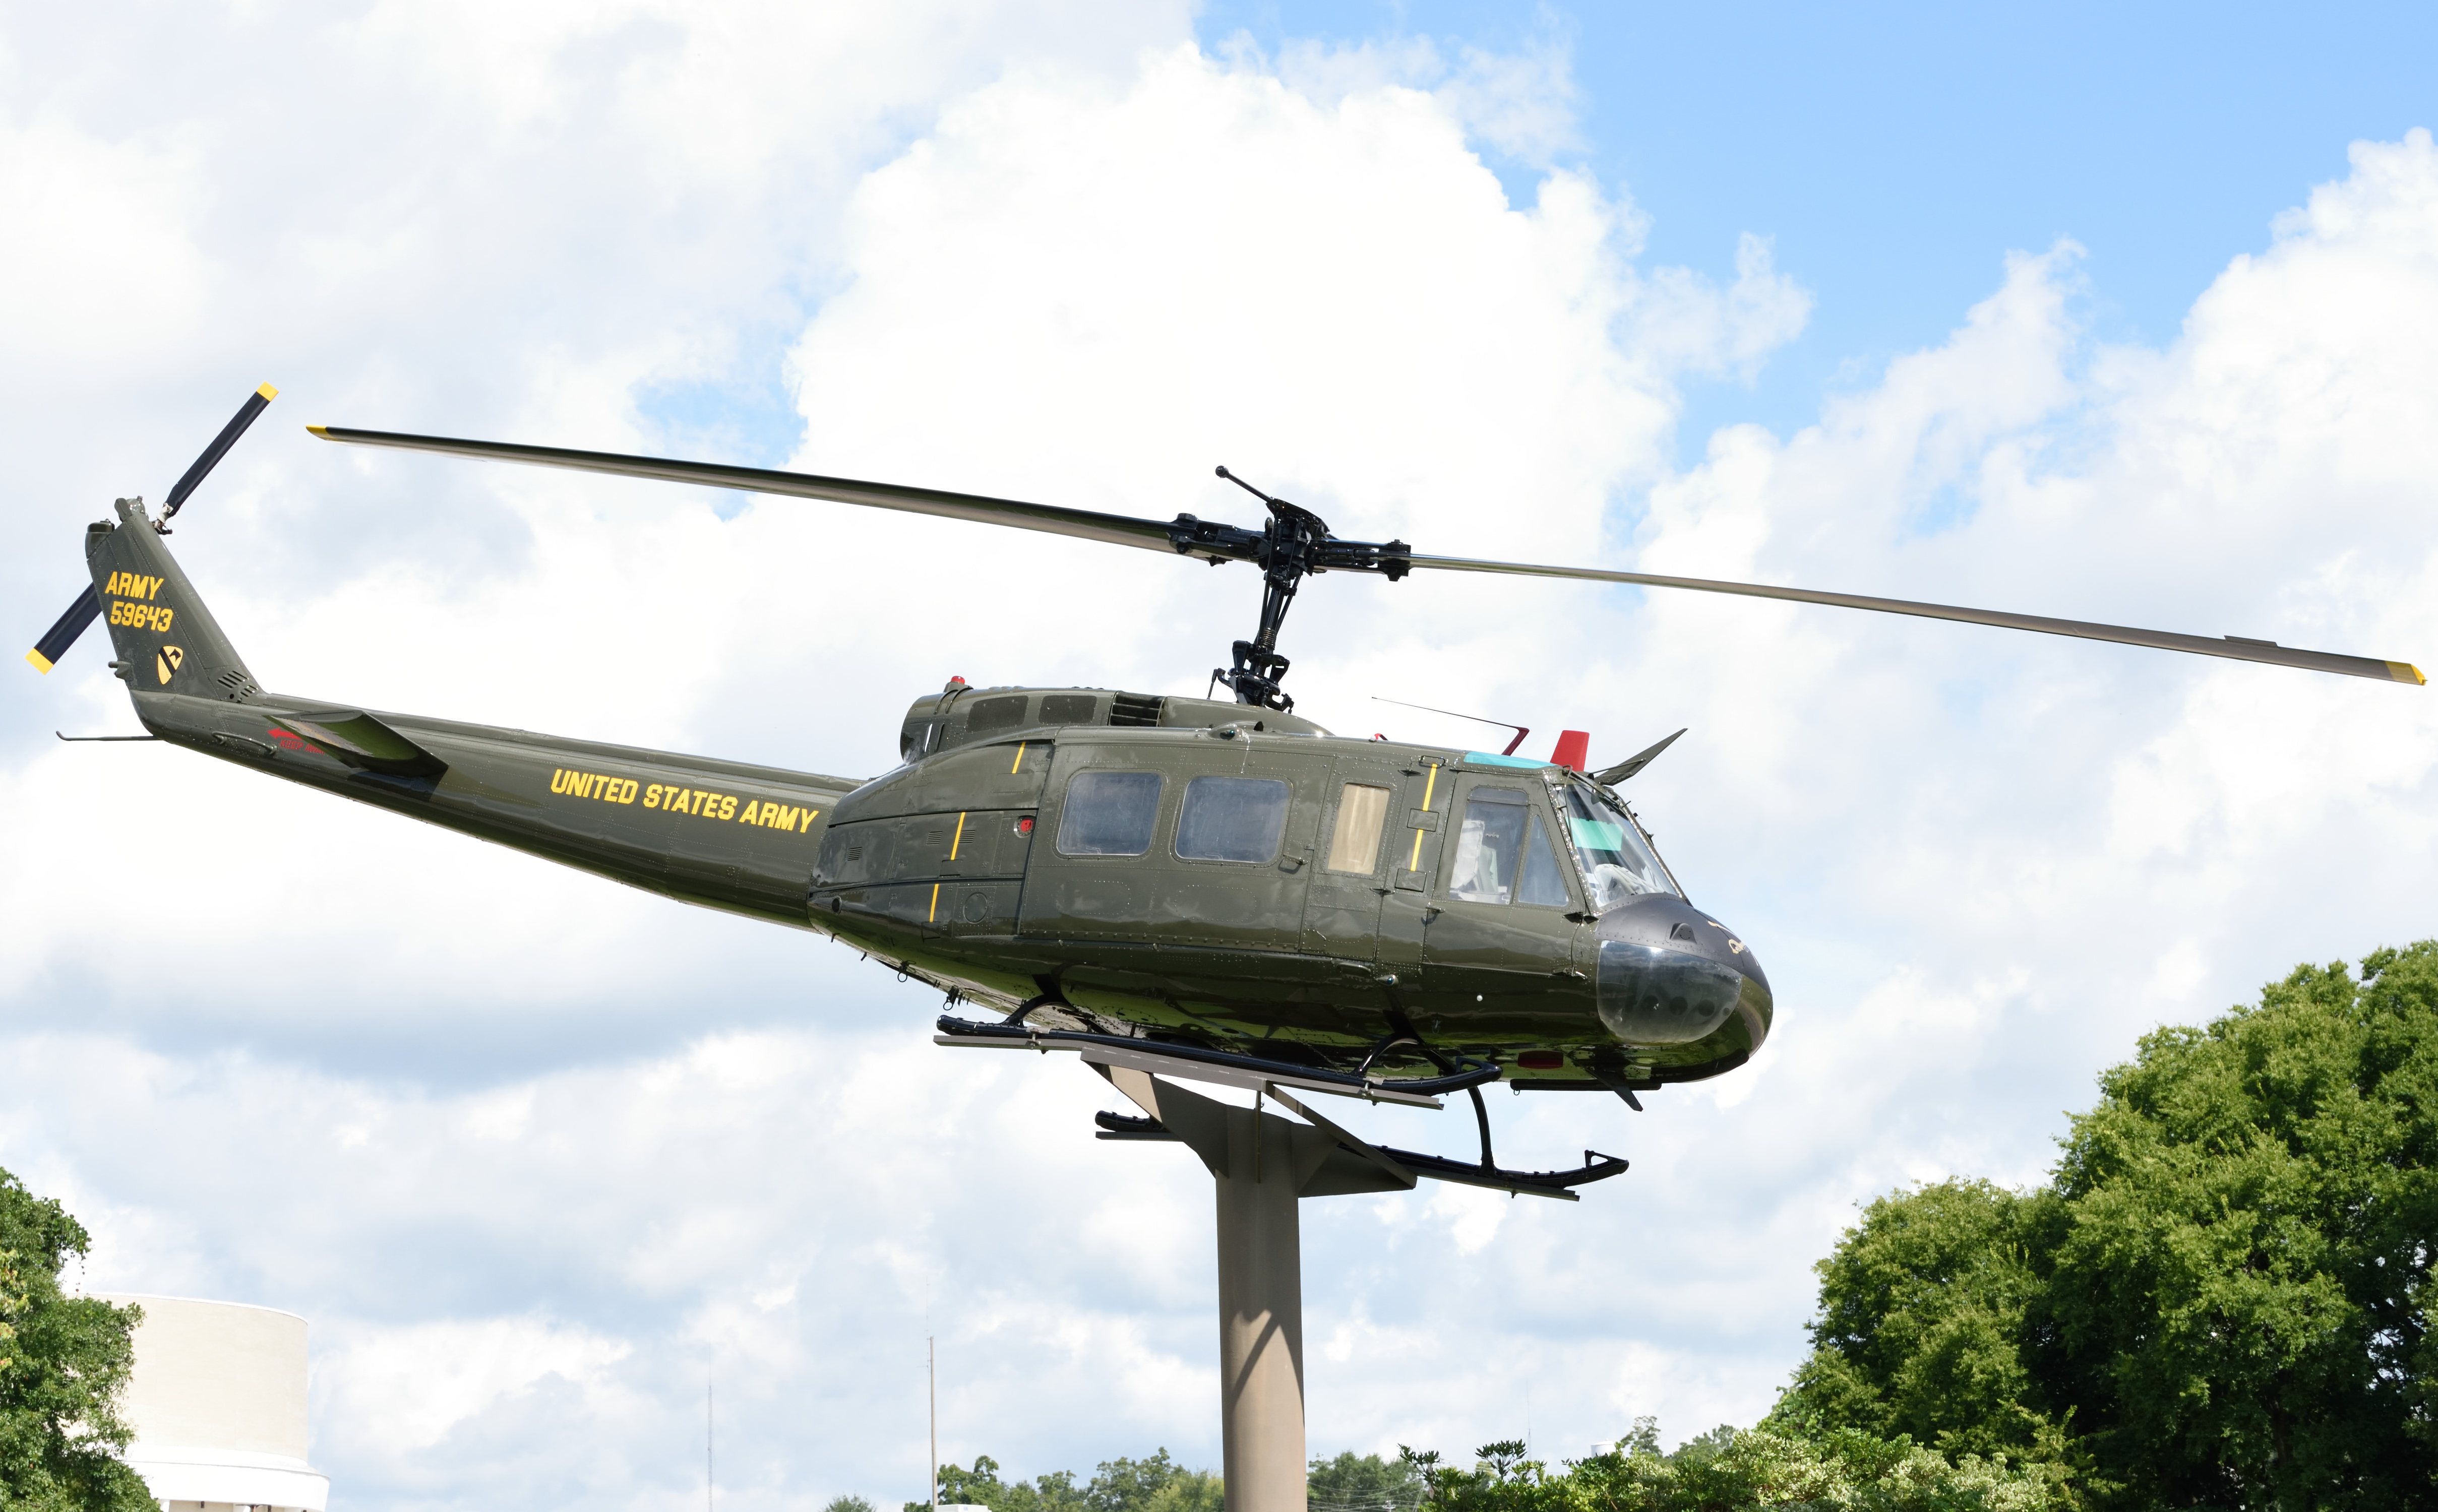 Bell UH-1H Iroquois "Huey" helicopter